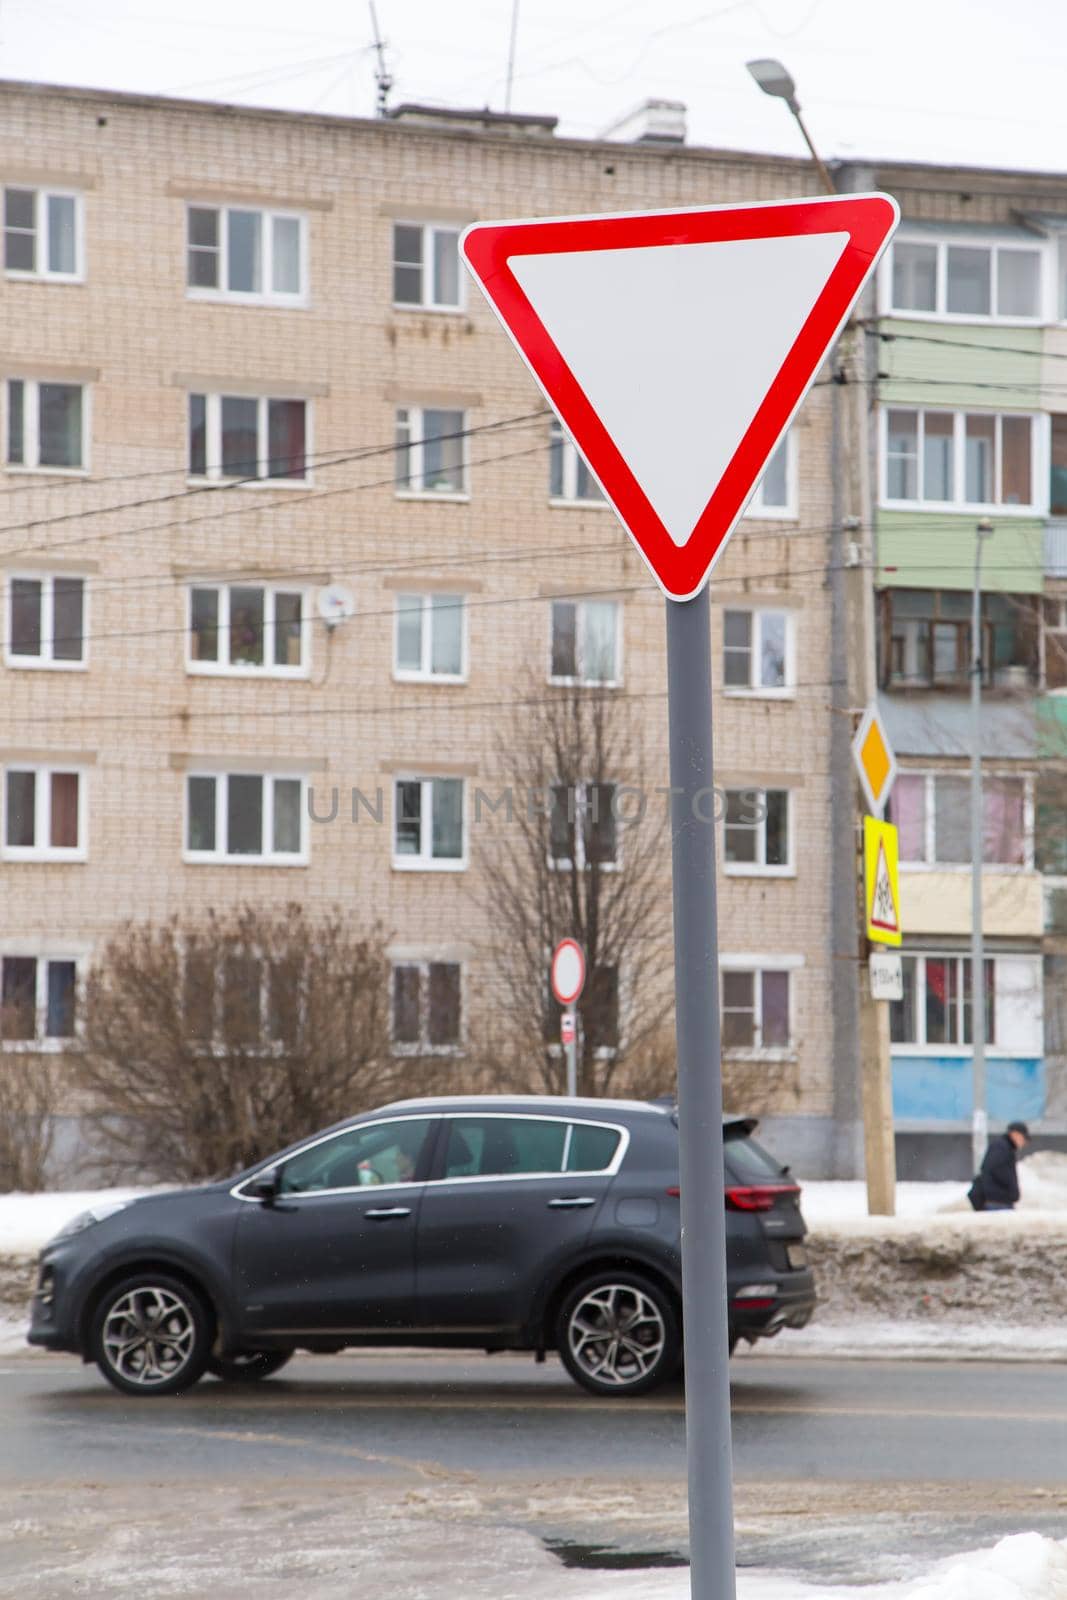 A white triangle sign with a red outline means give way. Against the background of a road with a moving car and a residential building. Winter, white snow lies outside.